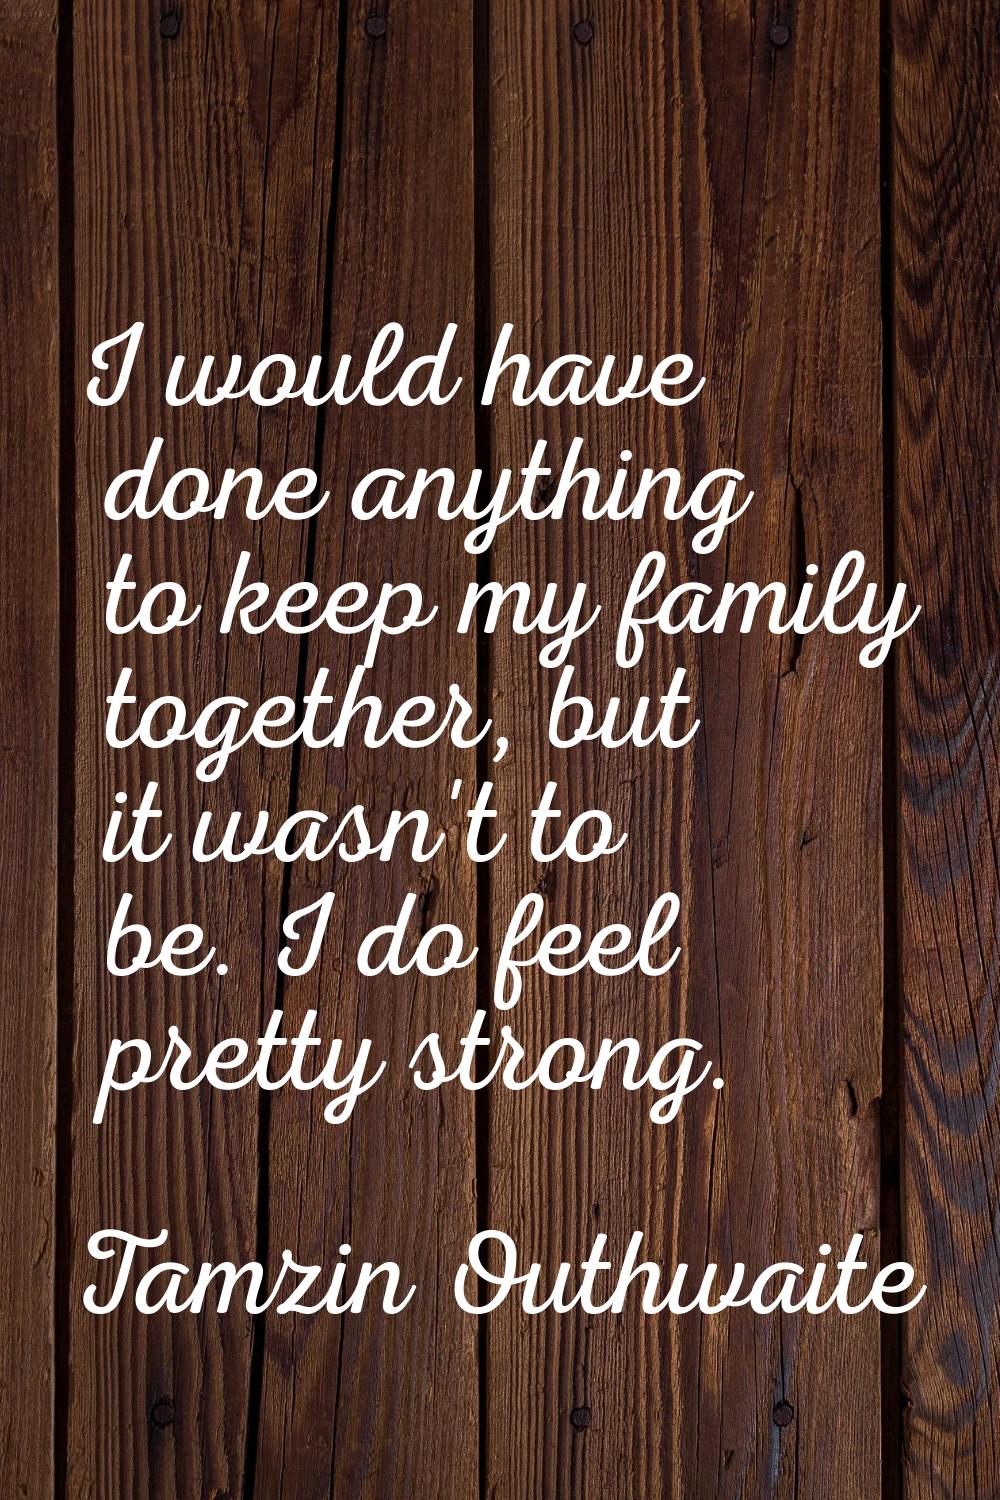 I would have done anything to keep my family together, but it wasn't to be. I do feel pretty strong